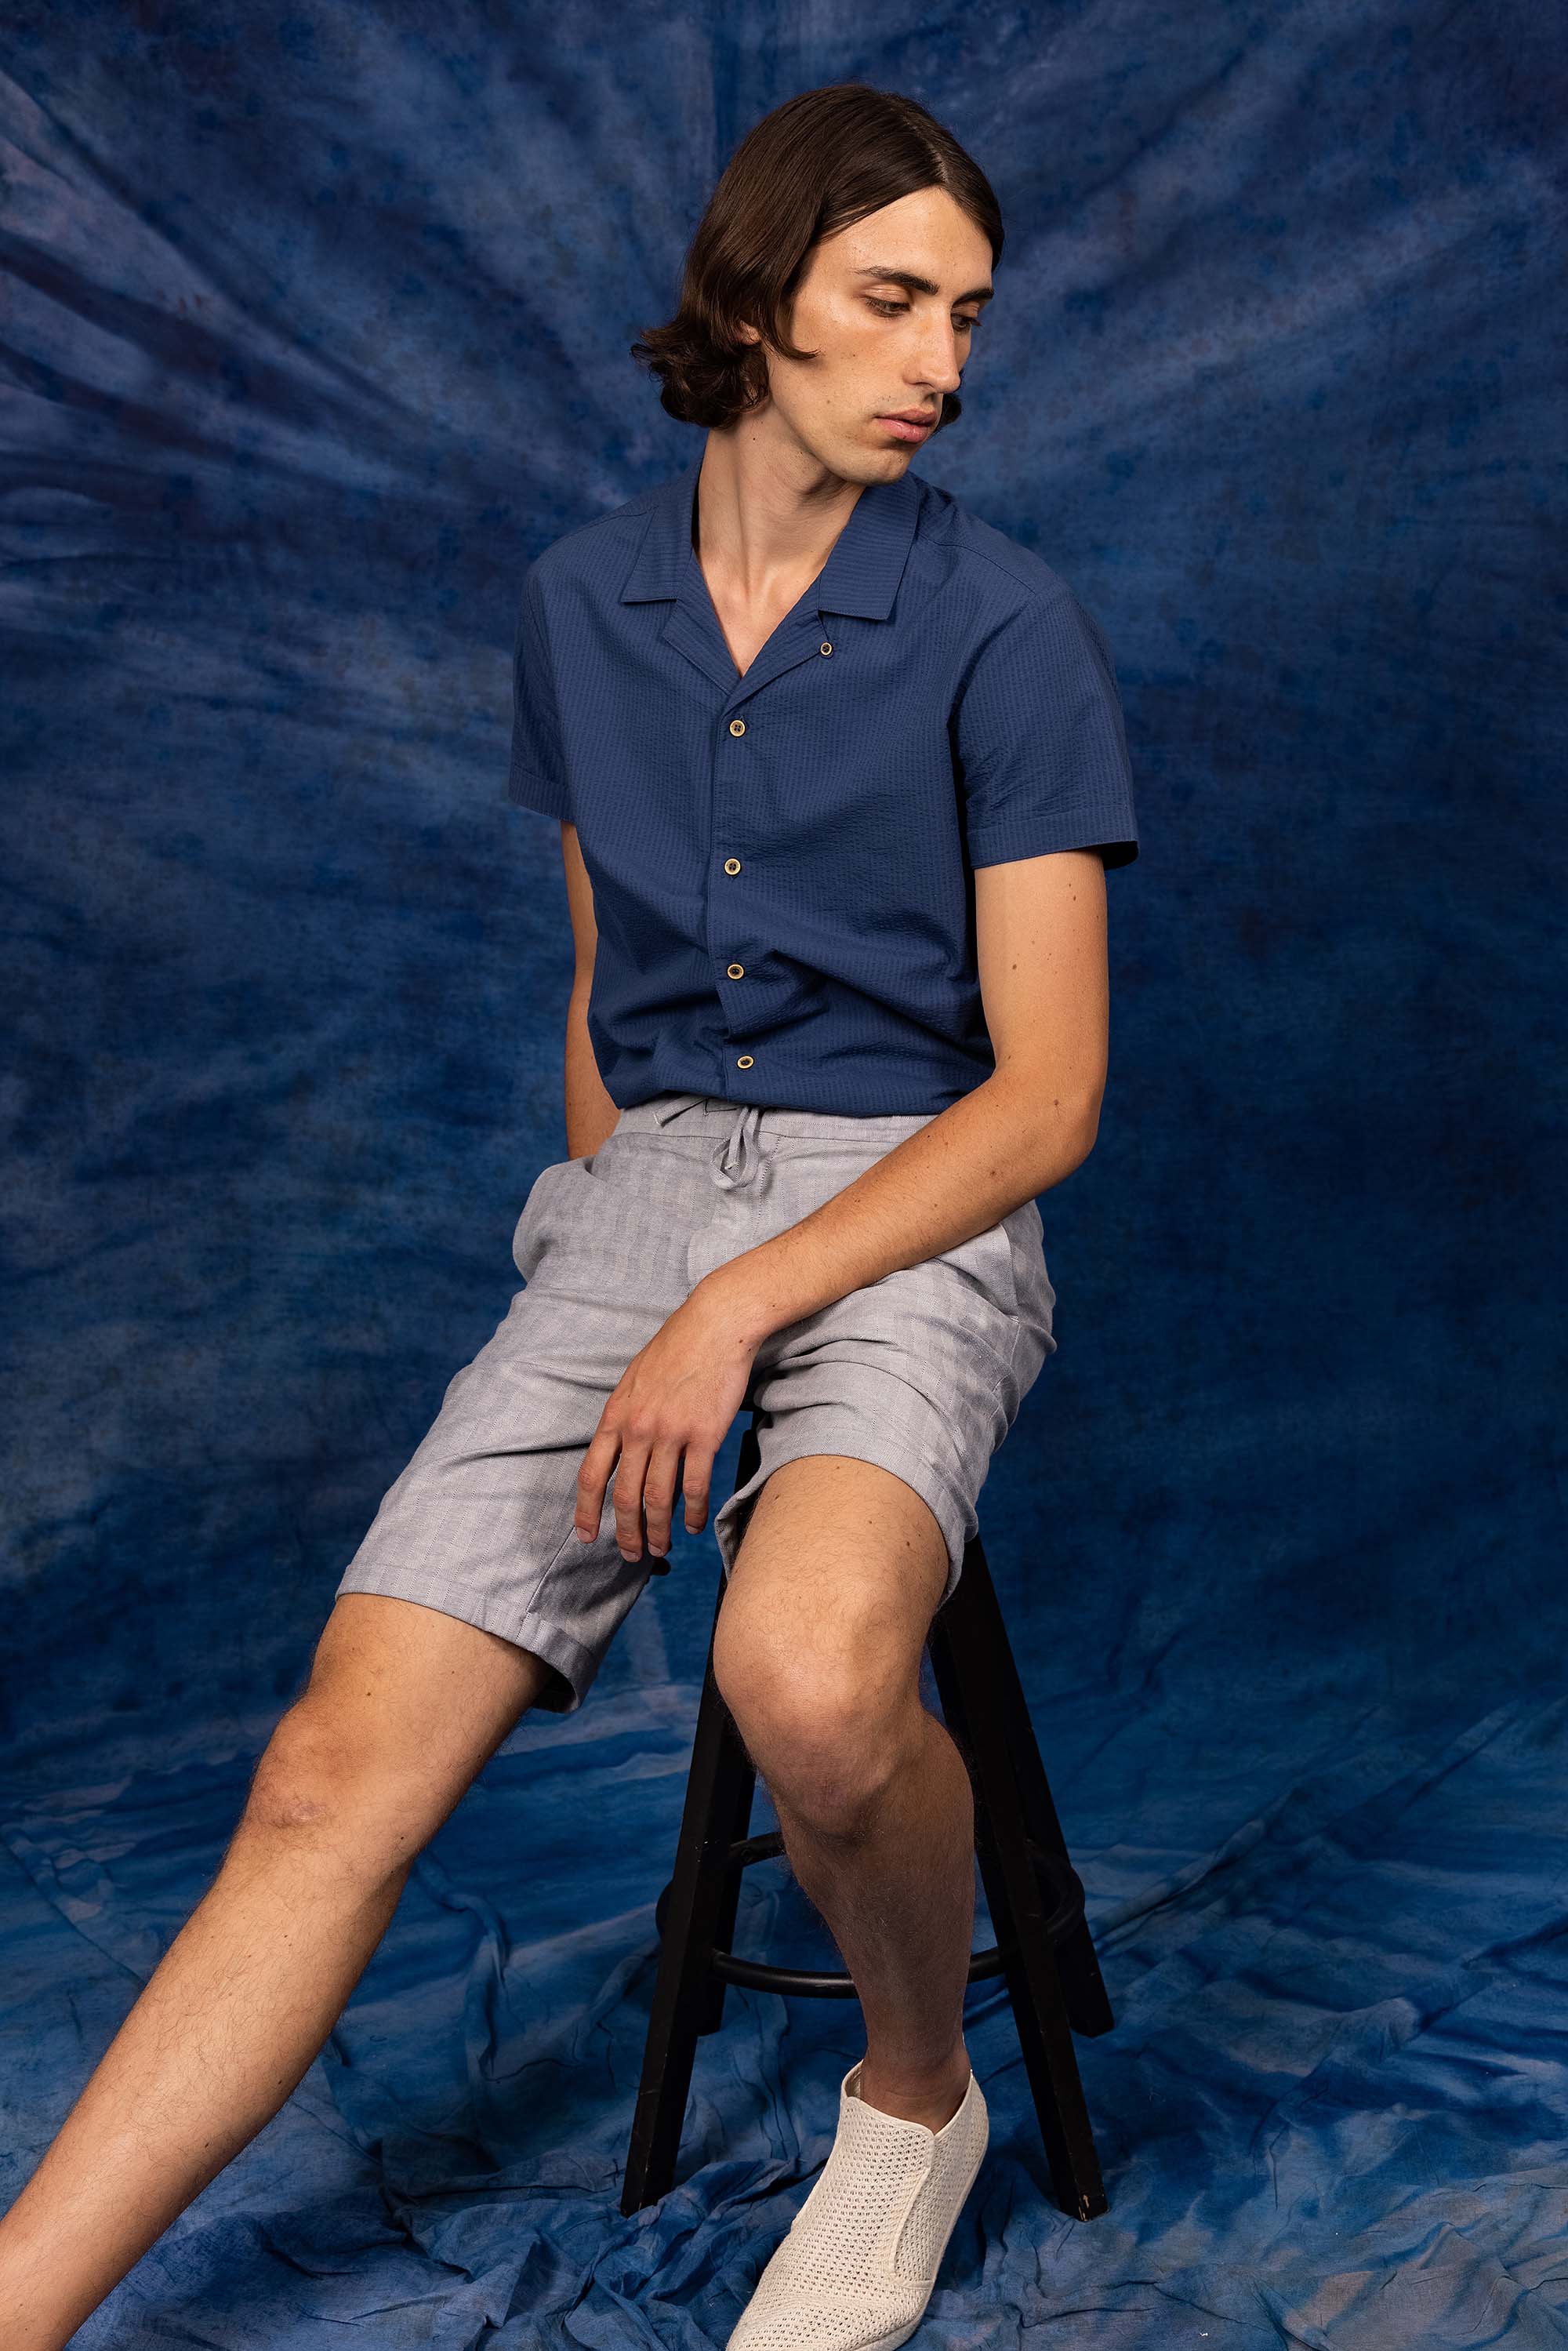 Light cotton shirt with open collar, short rolled-up sleeves and button placket